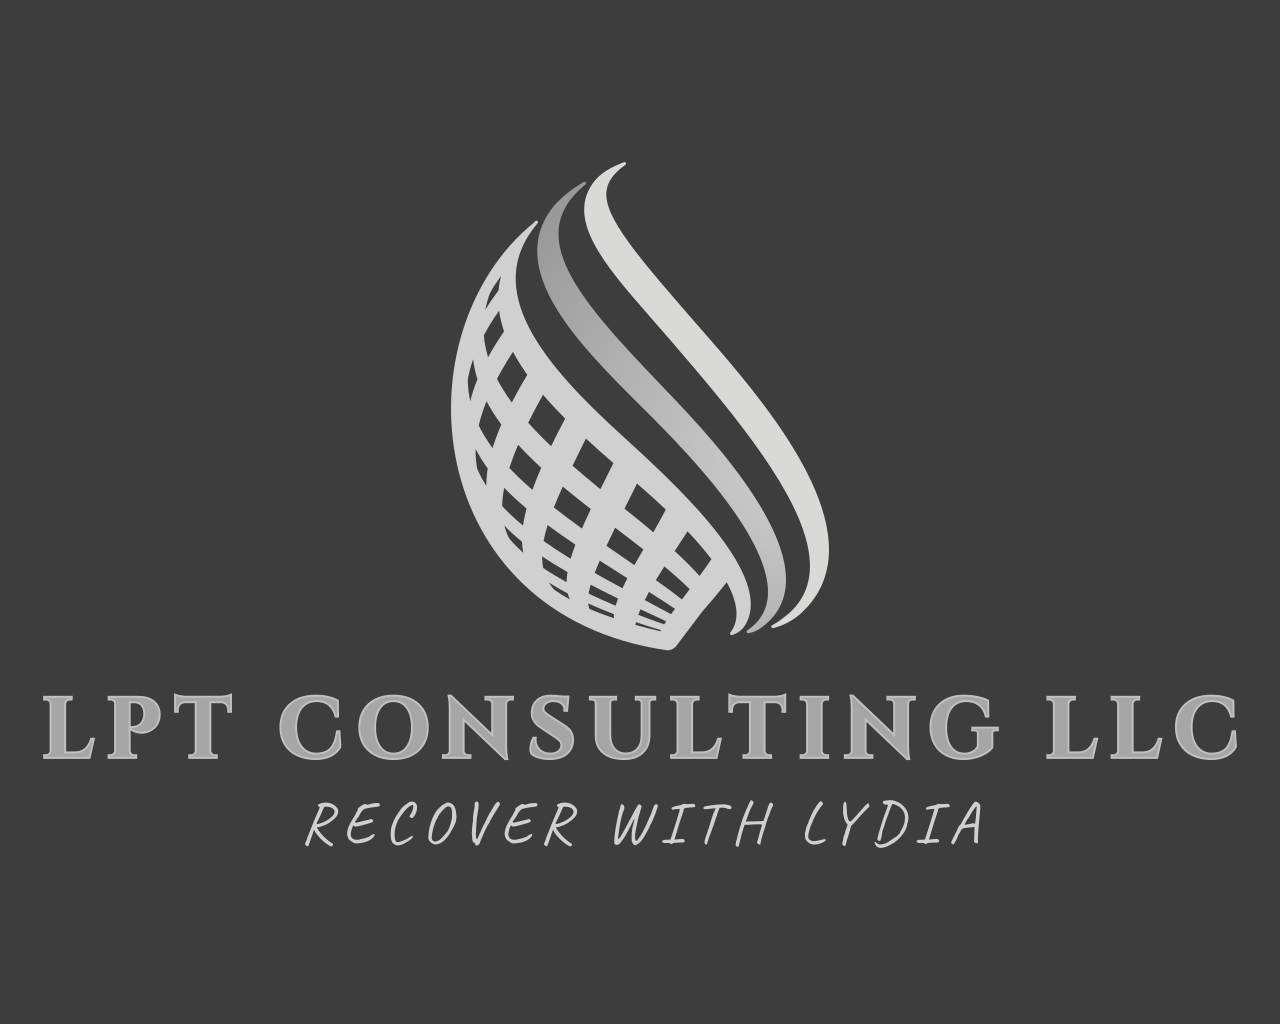 LPT CONSULTING LLC's web page